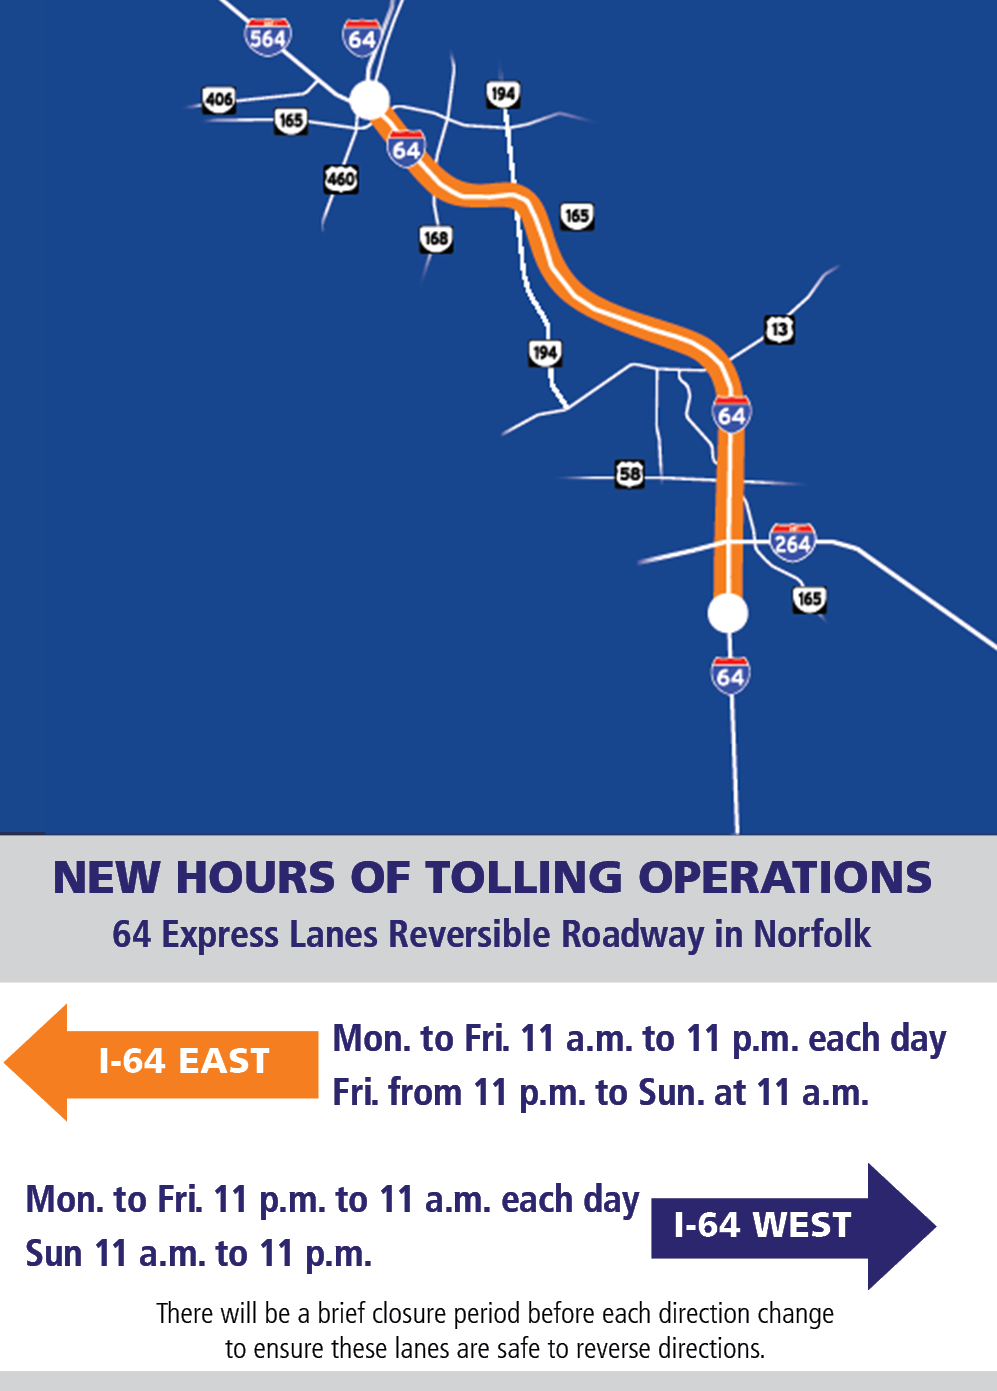 New Hour of Tolling Operations for the 64 Express Lanes Reversible Roadway in Norfolk